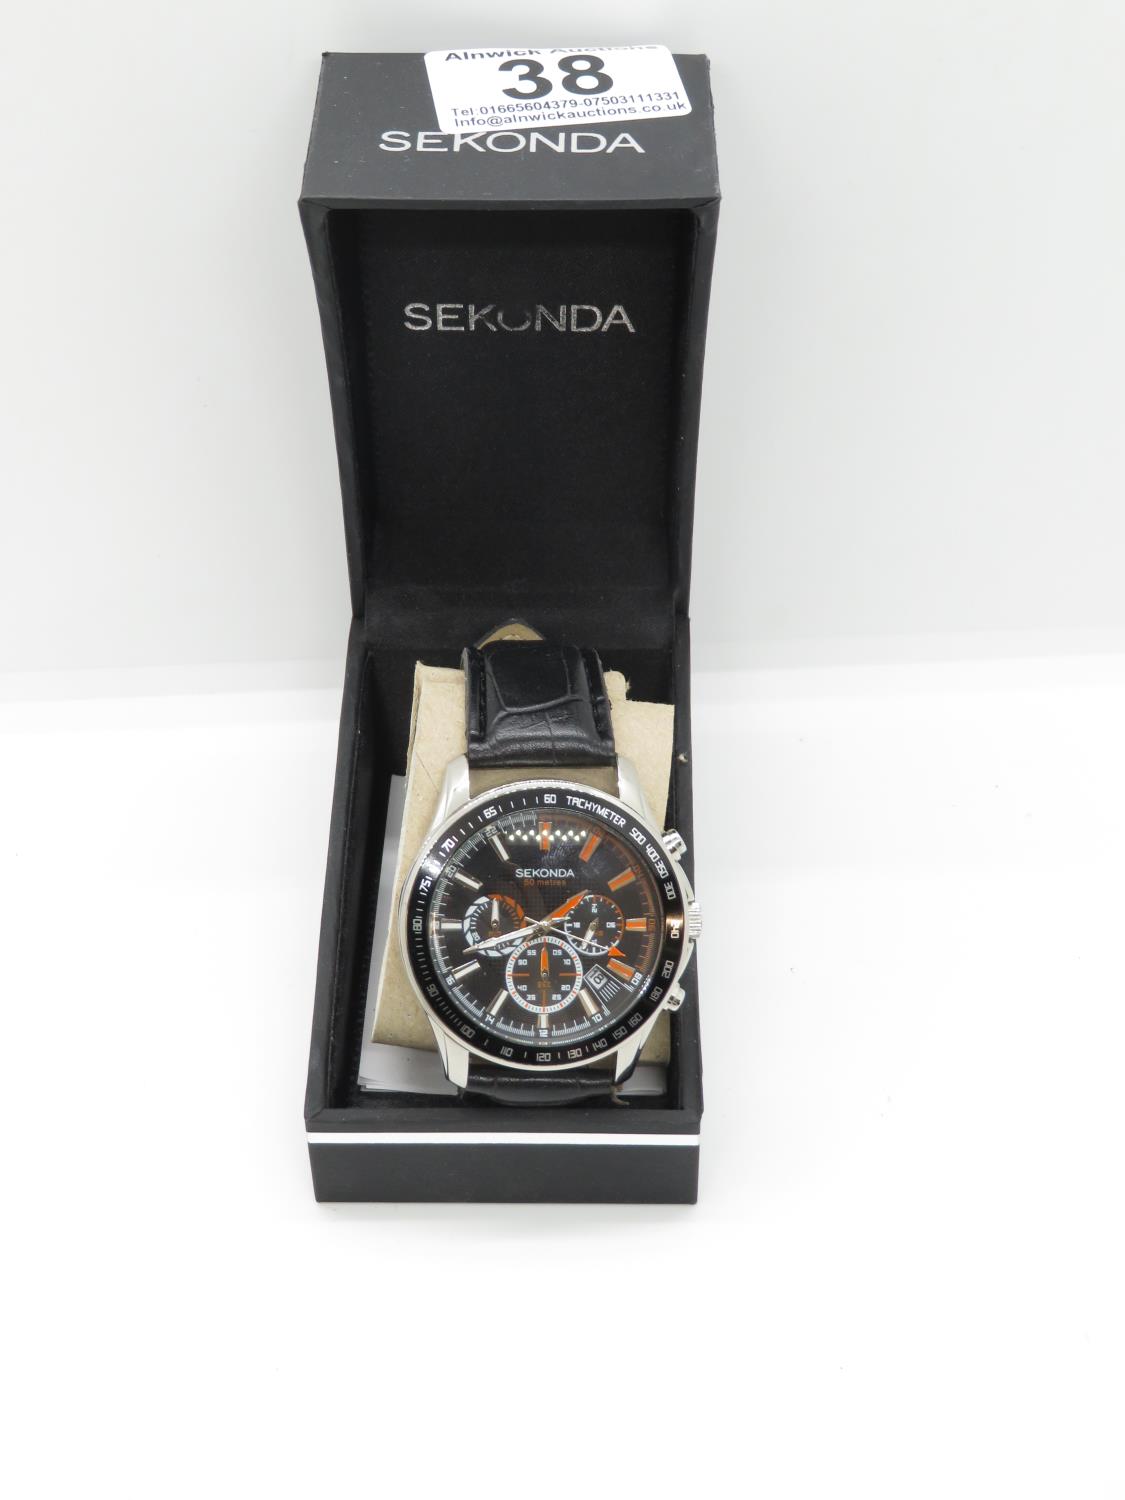 Sekonda 50m dive watch with box and paperwork - as new condition - Image 4 of 4